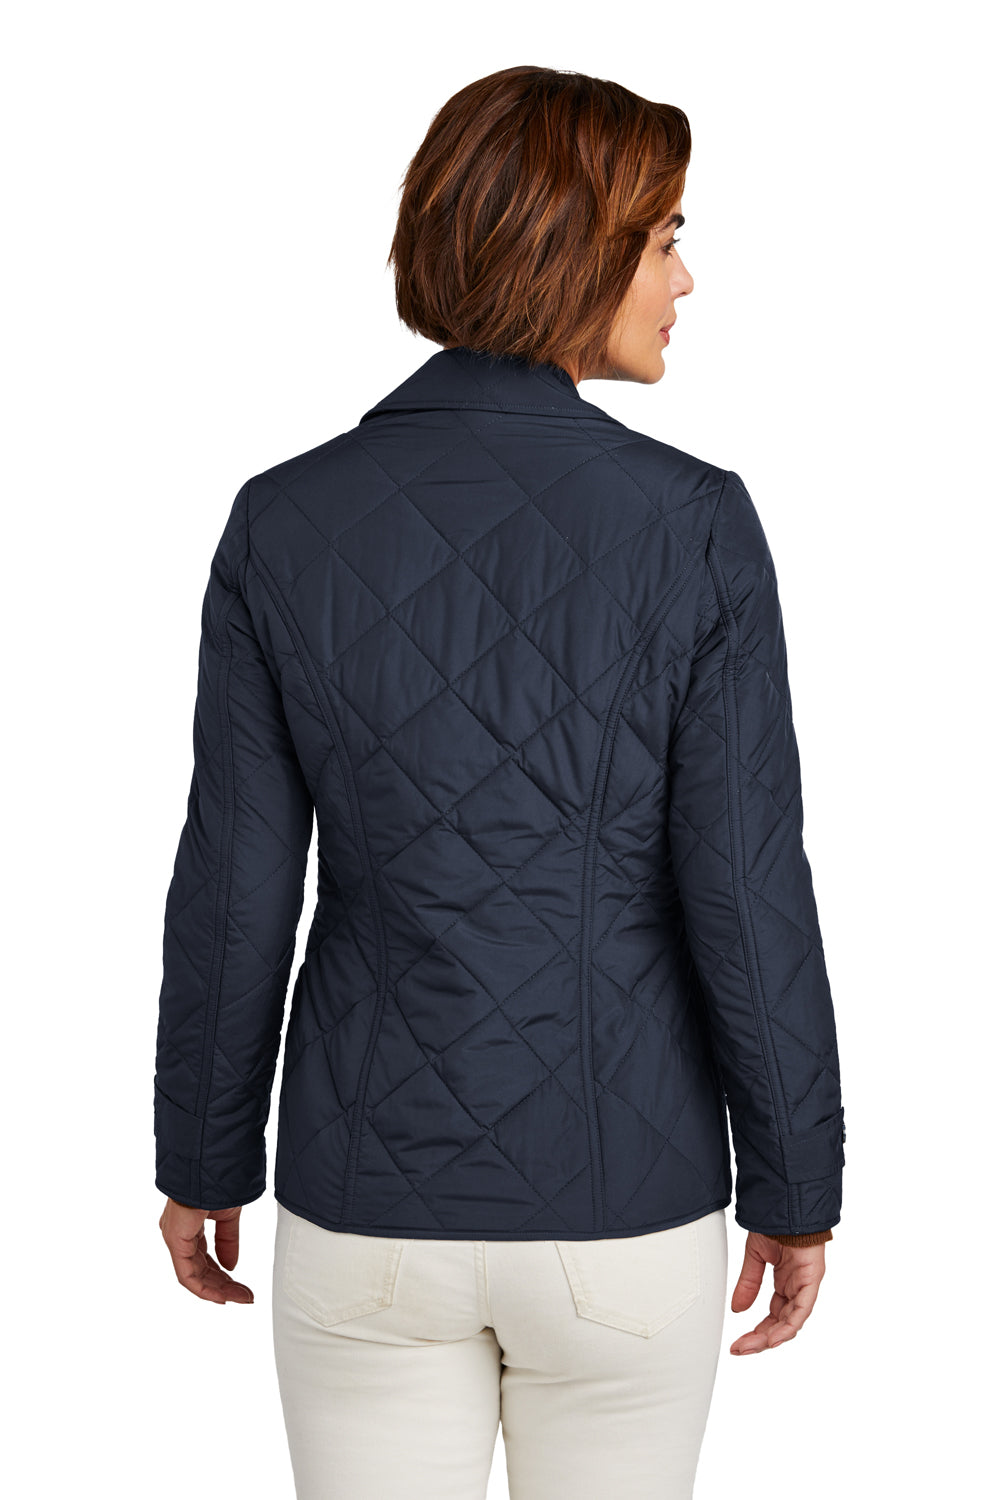 Brooks Brothers Womens Water Resistant Quilted Full Zip Jacket Night Navy Blue Model Back